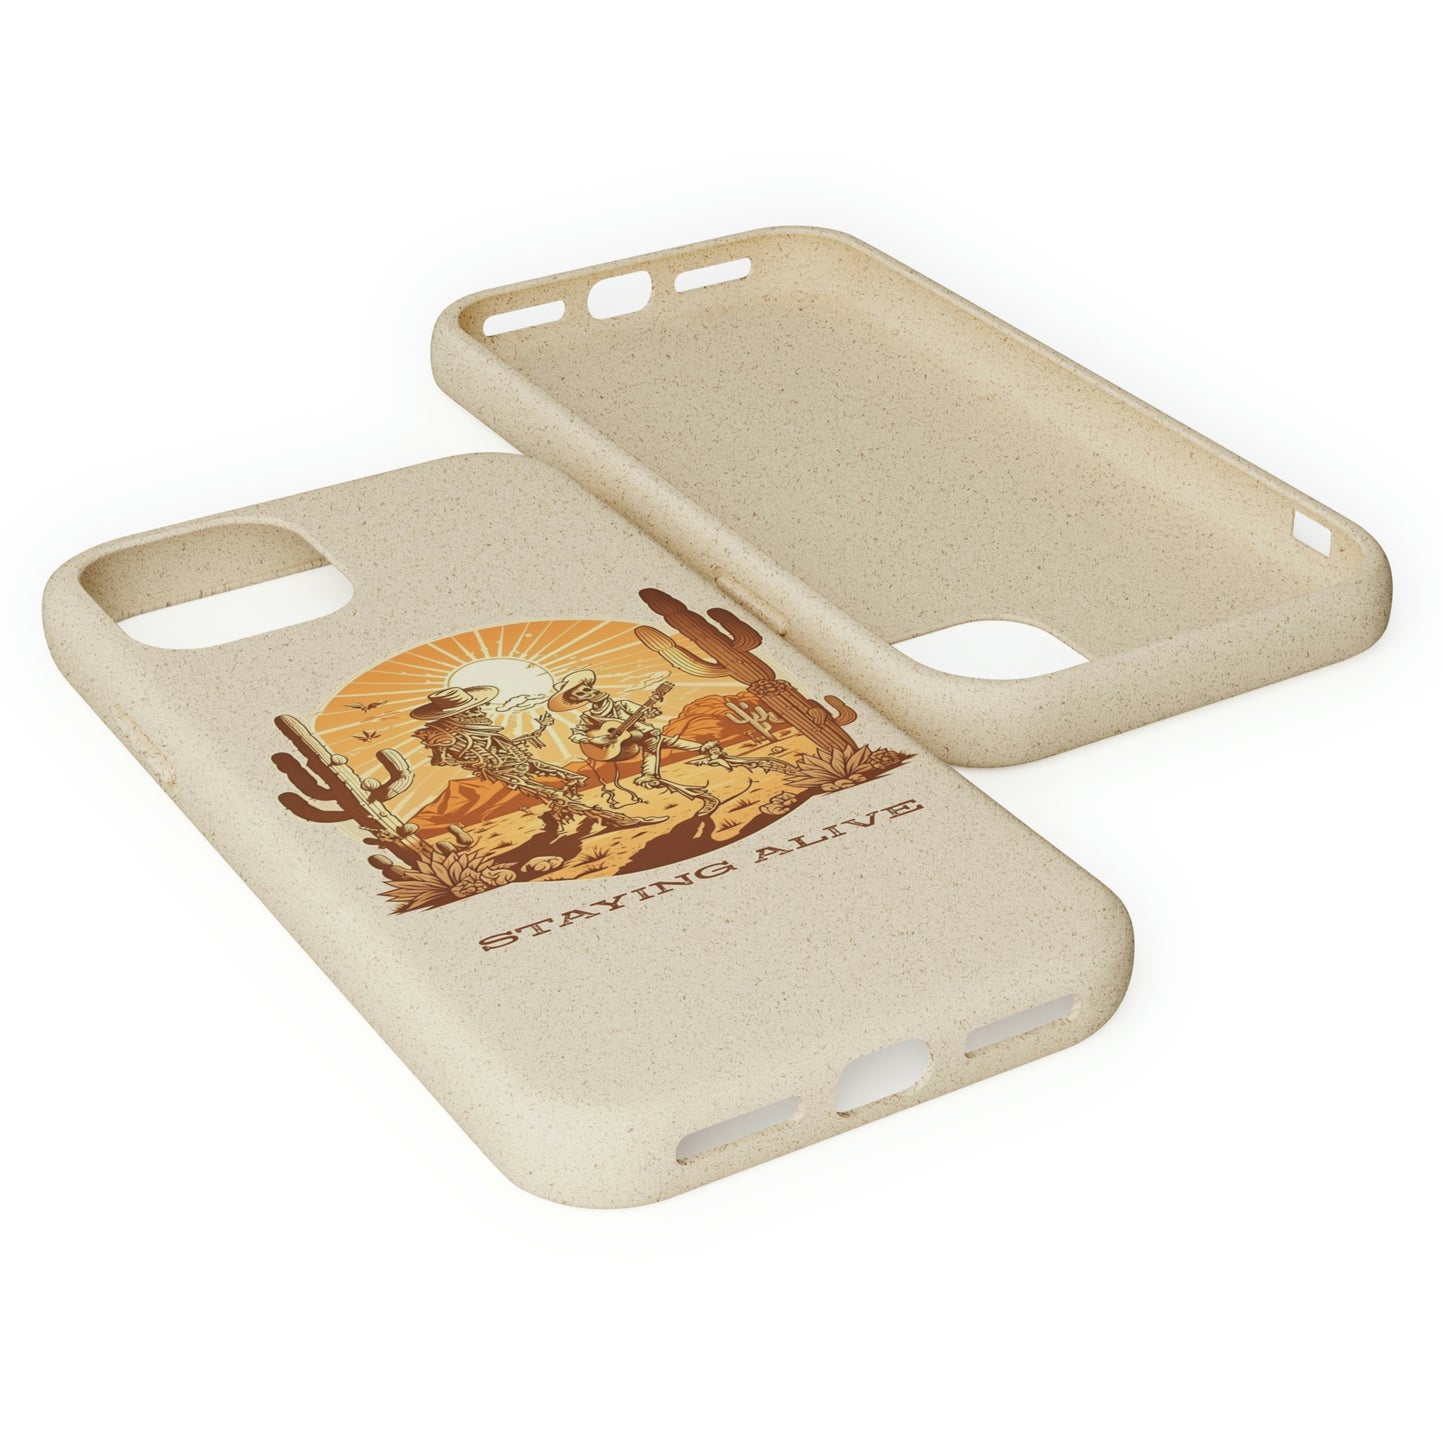 Staying Alive biodegradable phone case